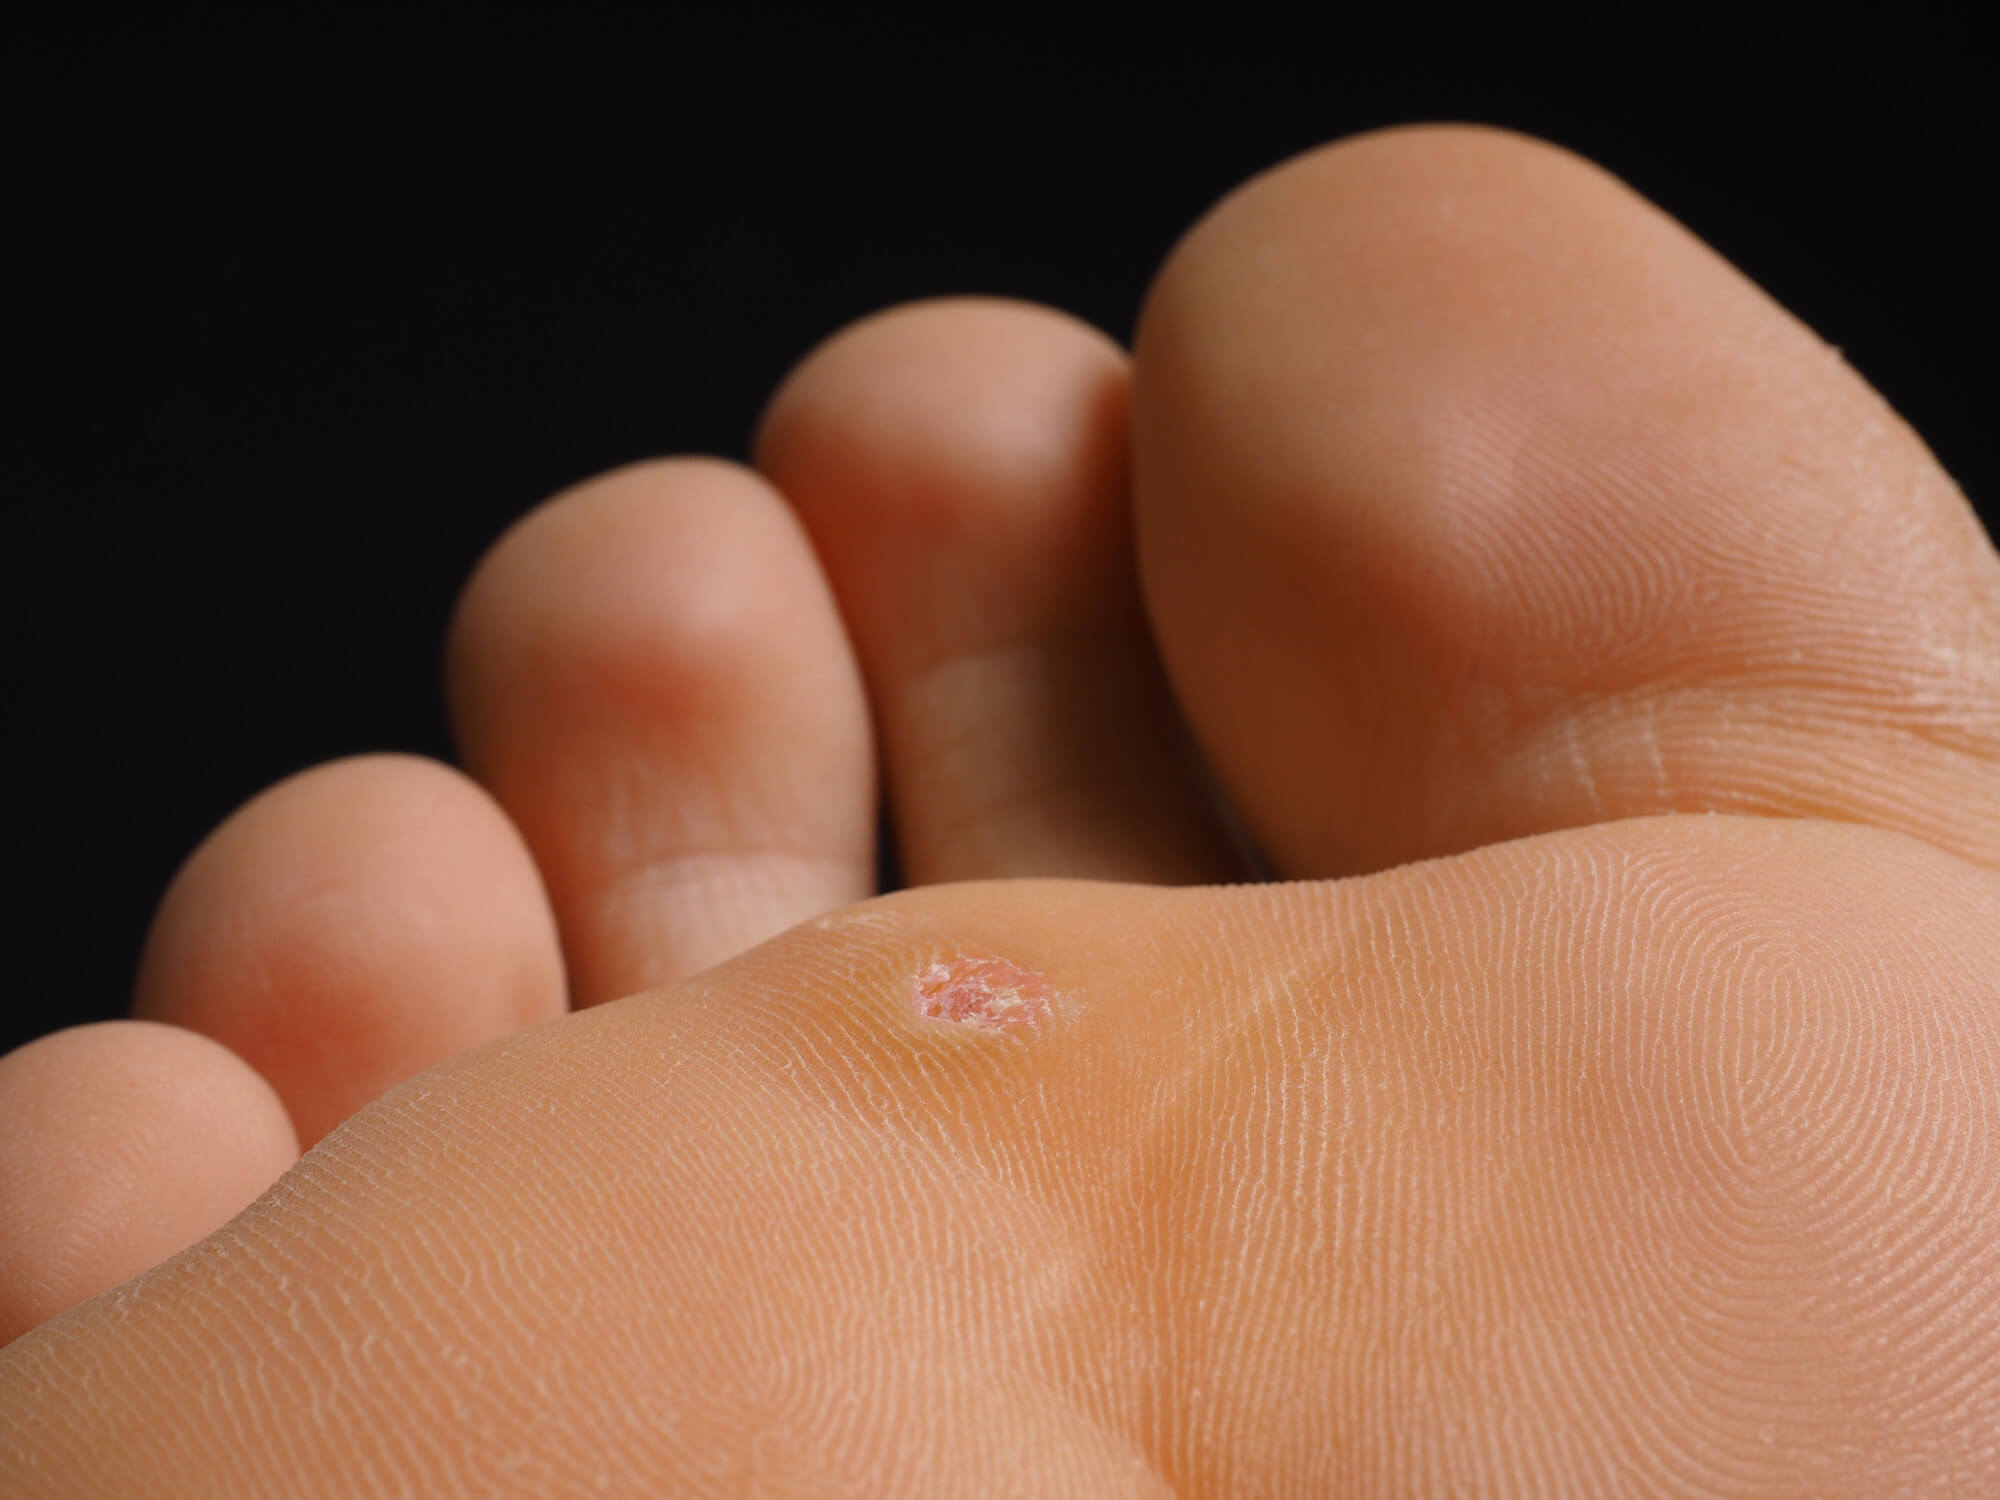 wart on the foot